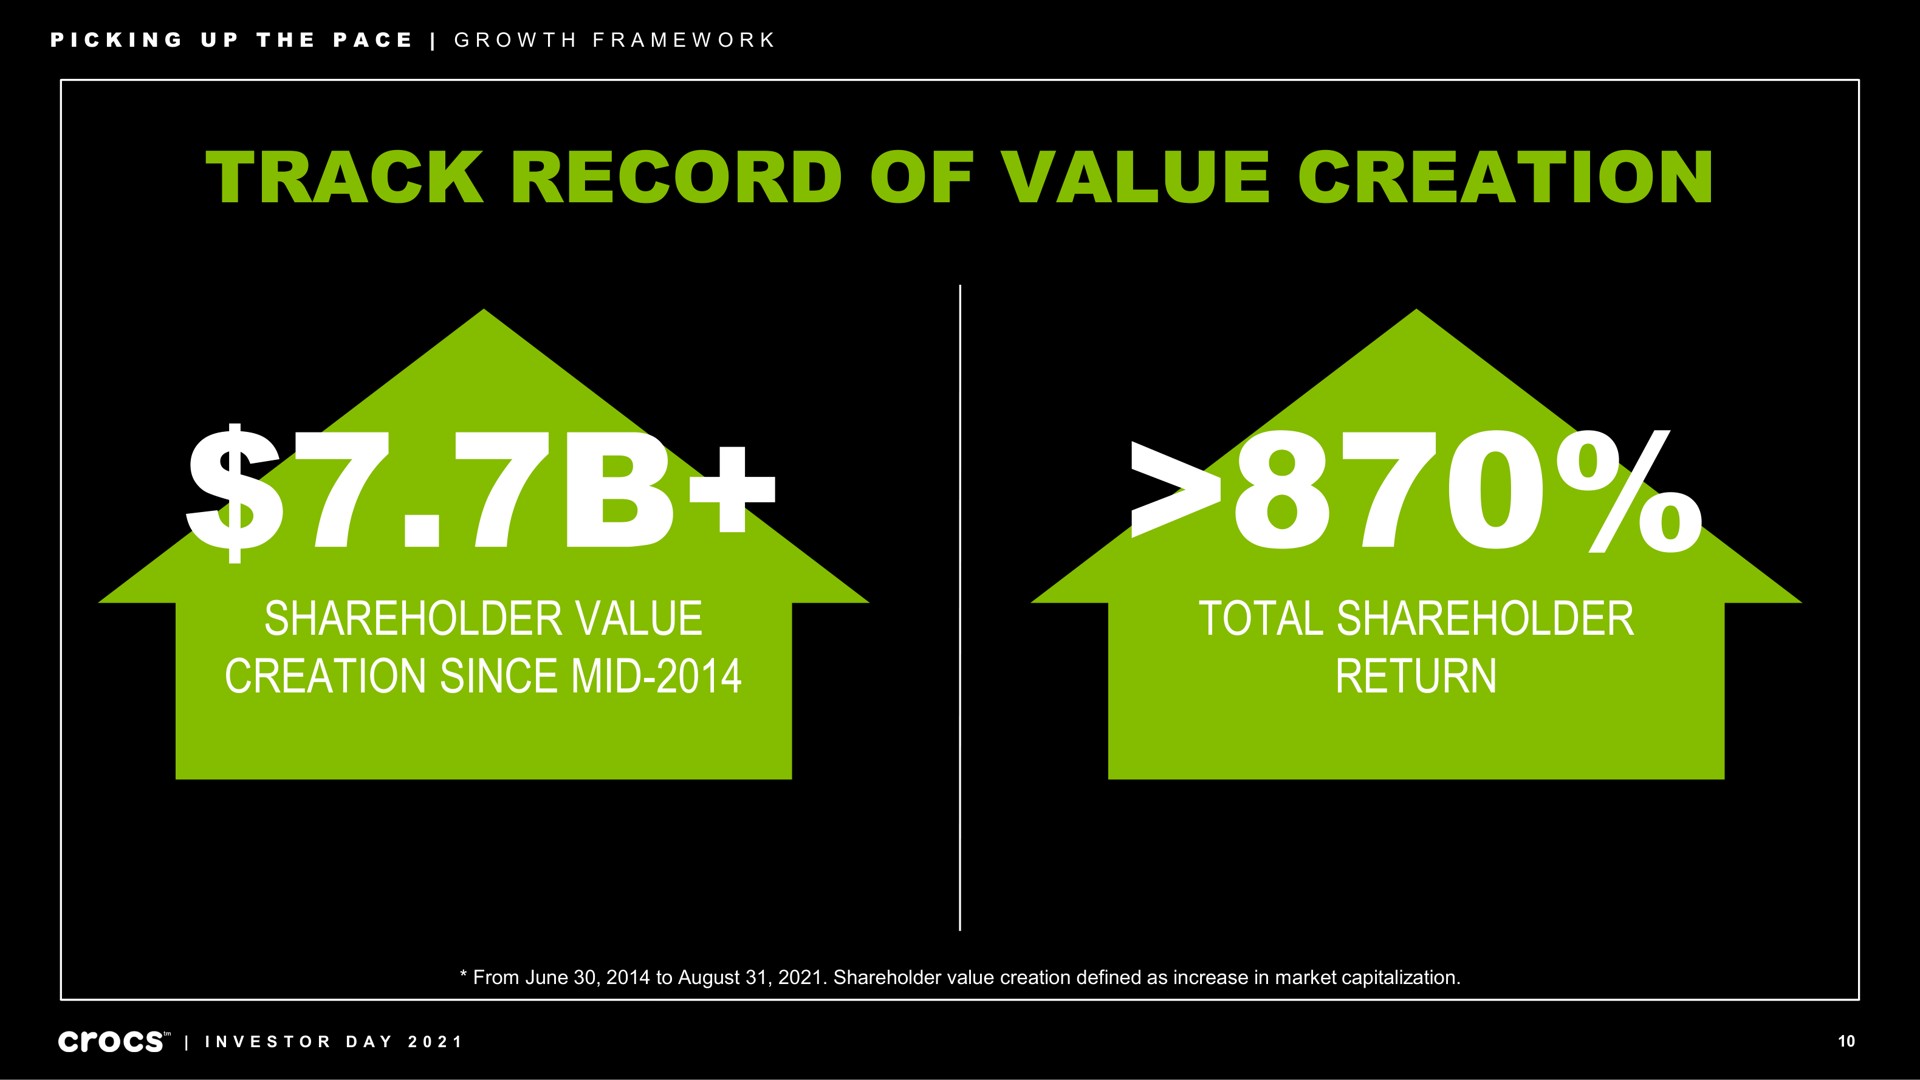 track record of value creation shareholder value creation since mid total shareholder return picking up the pace growth framework investor day | Crocs